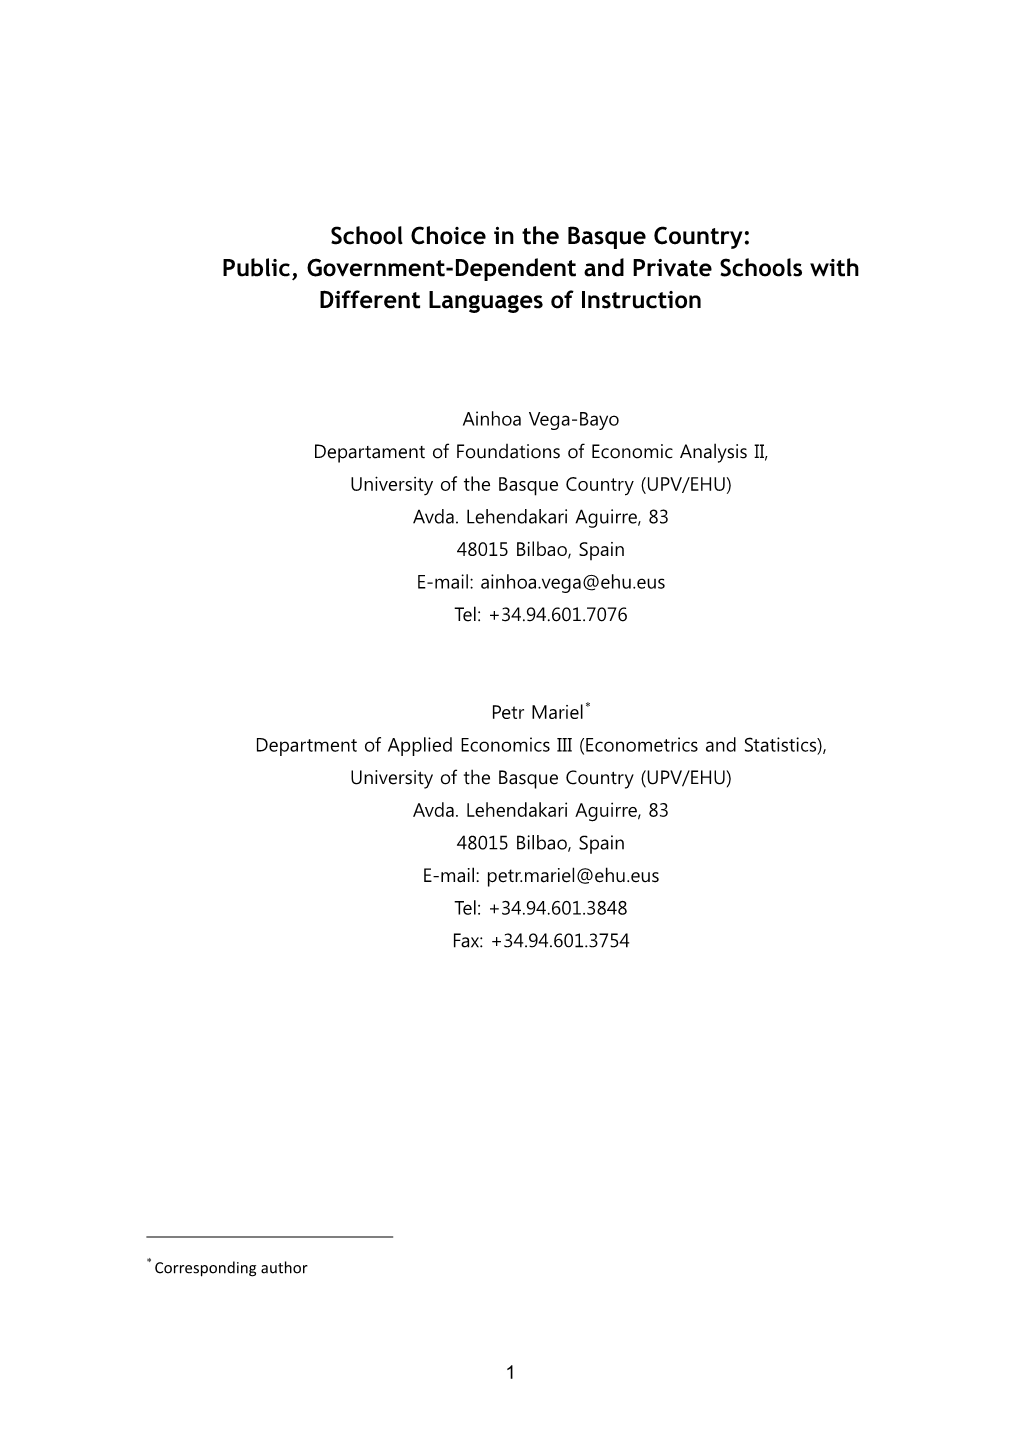 School Choice in the Basque Country: Public, Government-Dependent and Private Schools with Different Languages of Instruction